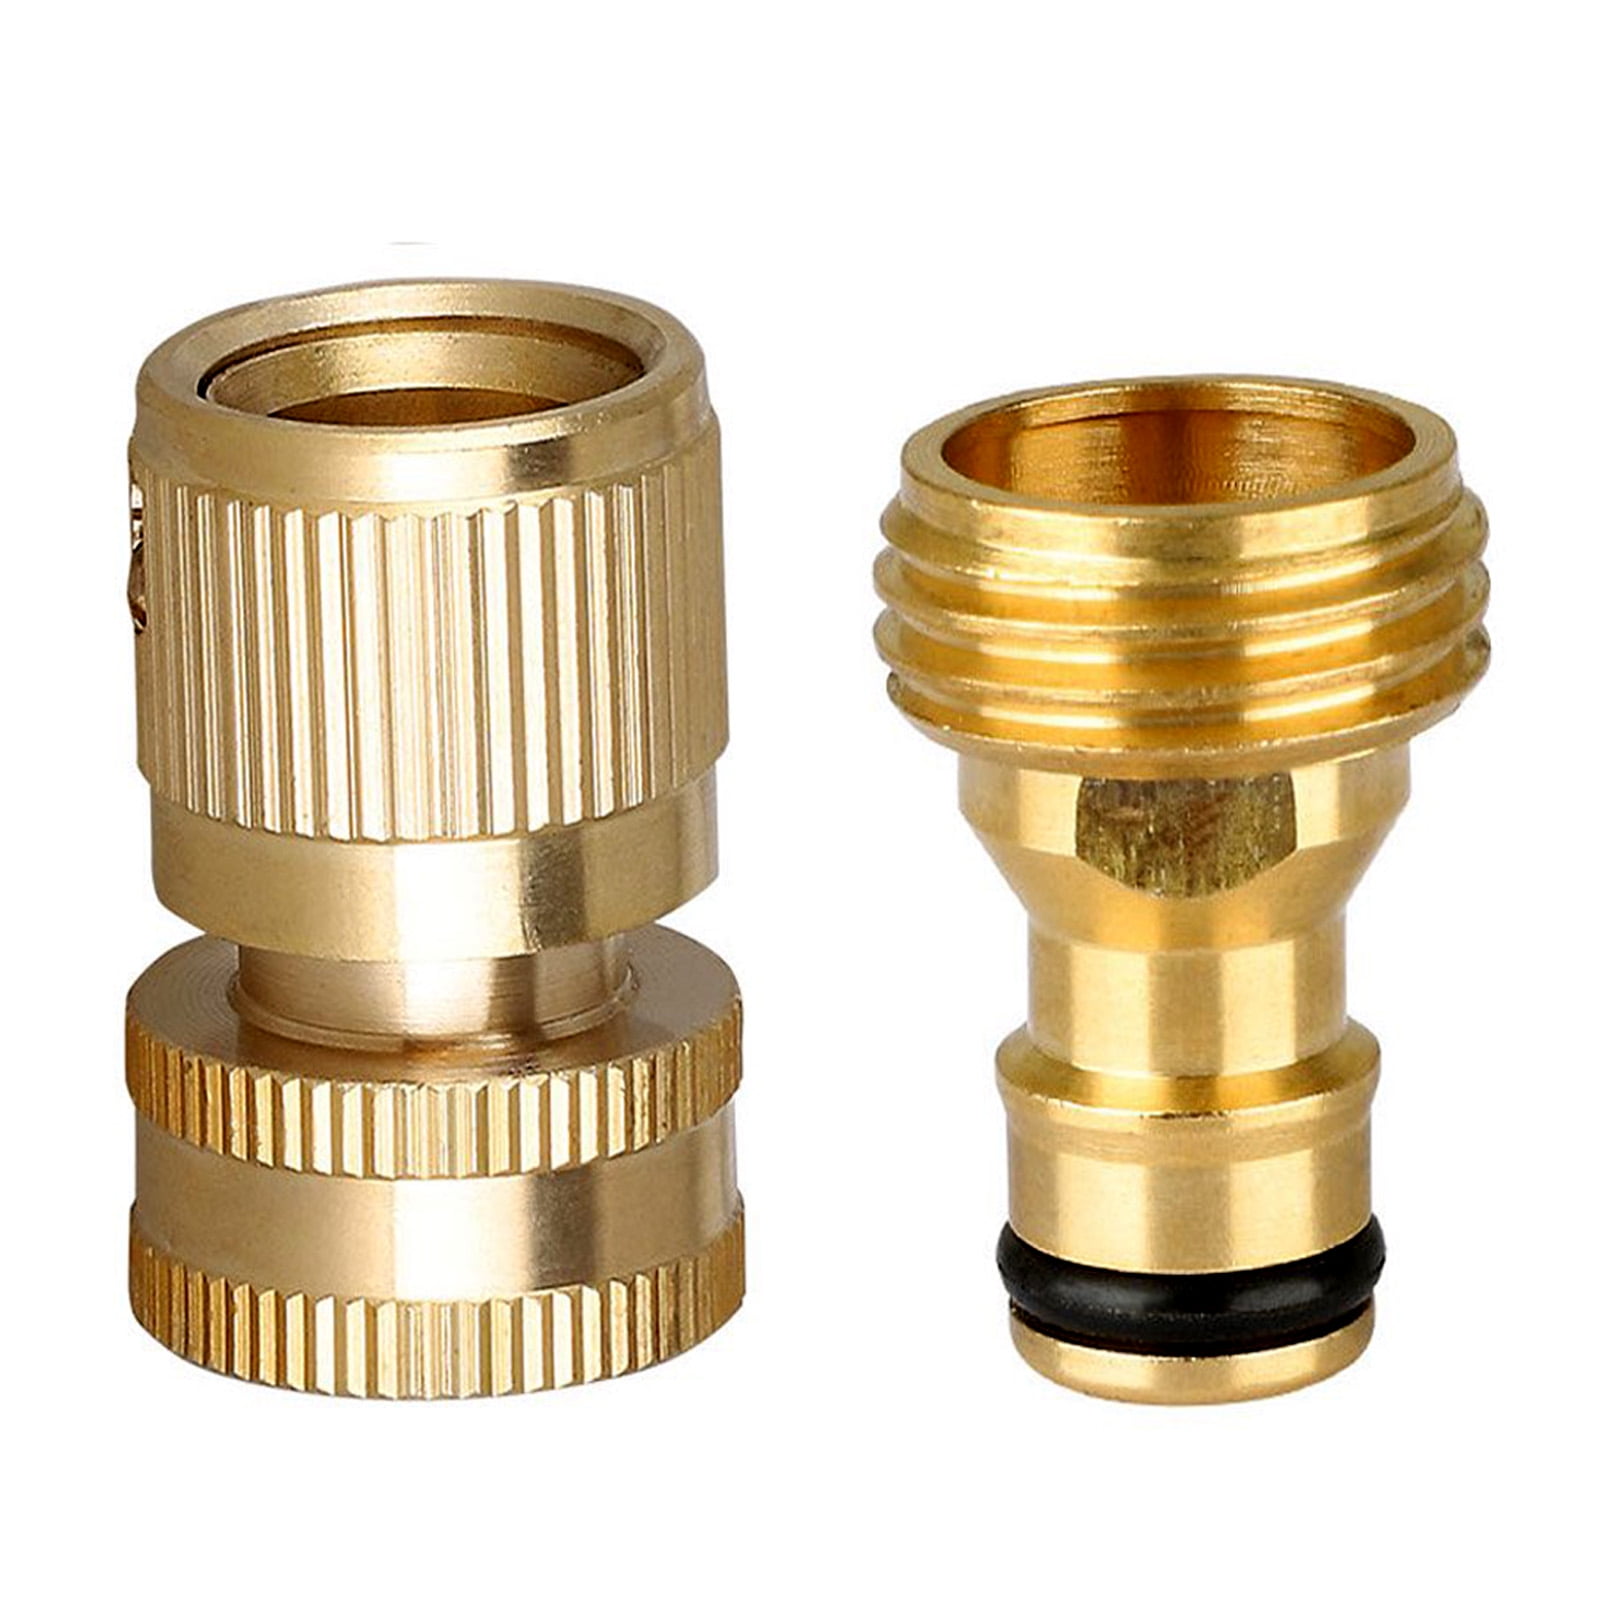 Gardening Pipe Threaded Water Hose Tube Snap Tap Adaptor Brass Quick Connector 